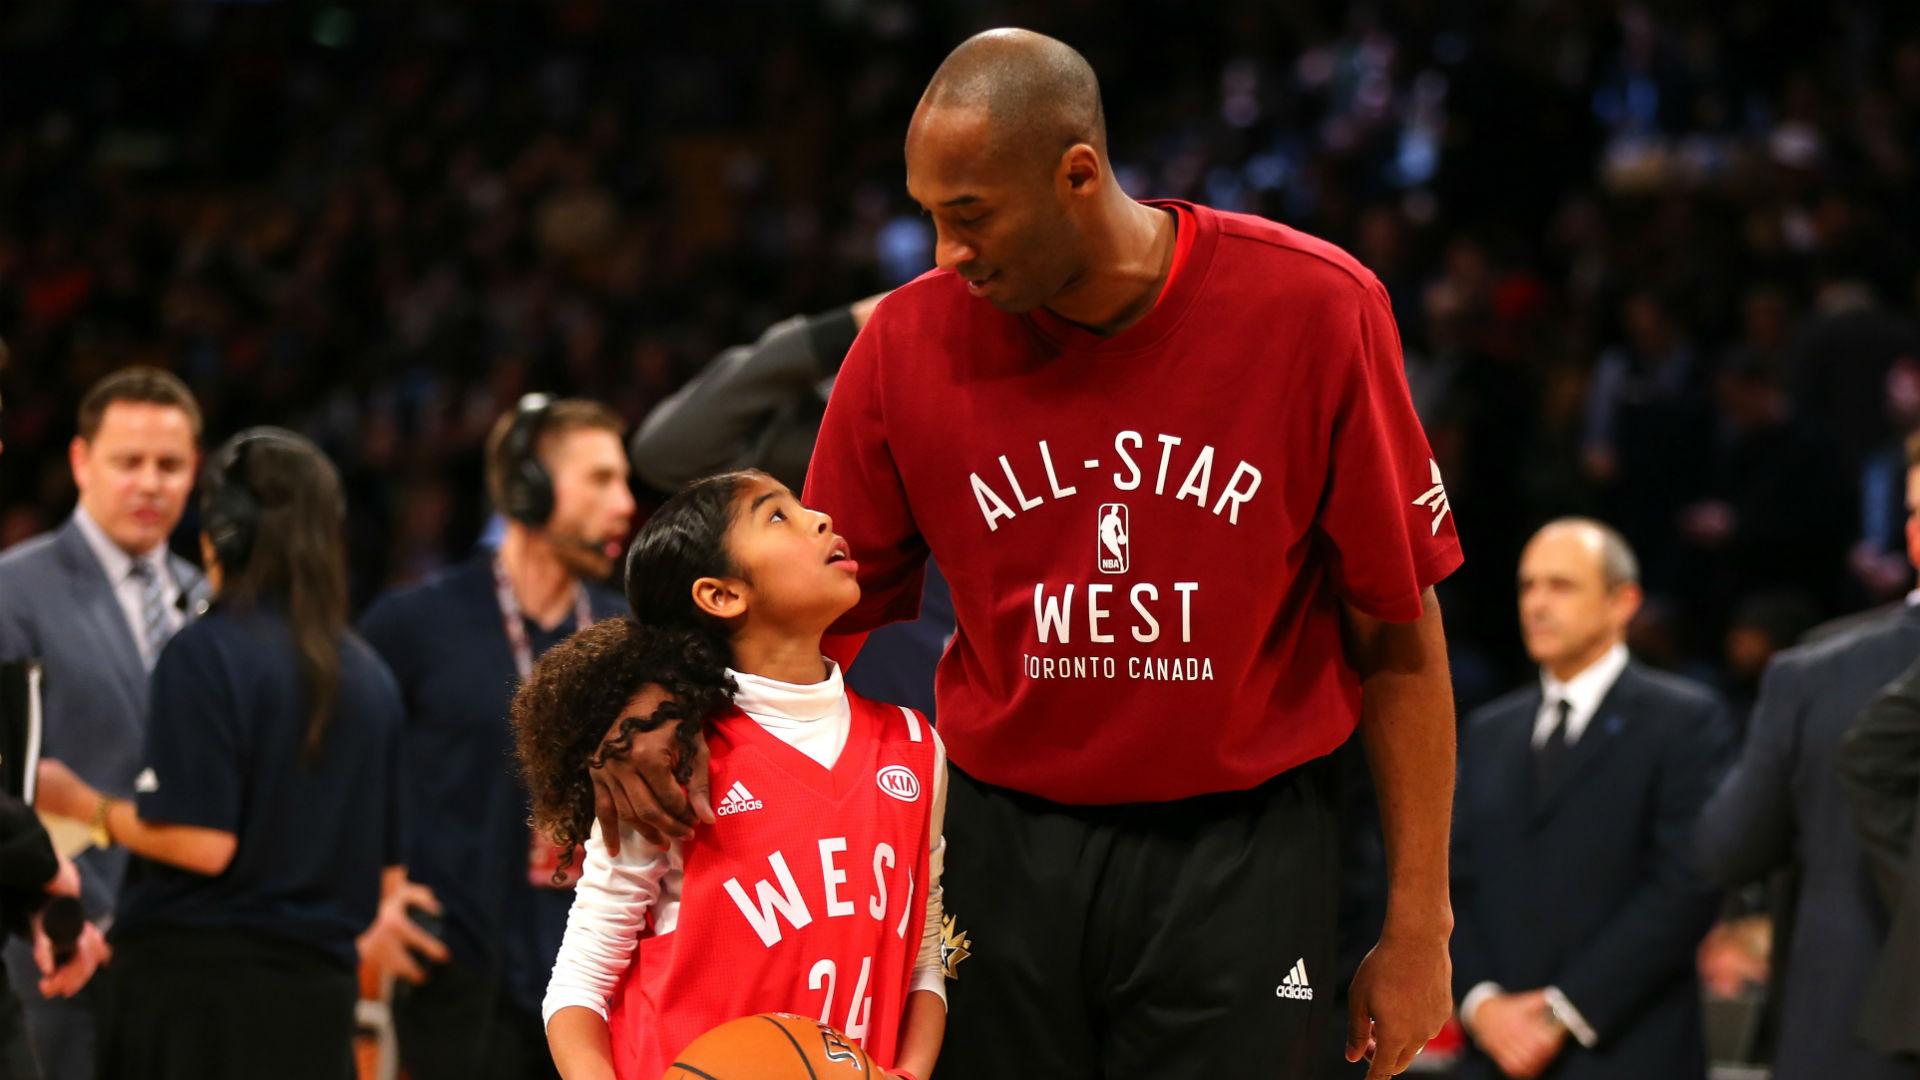 Kobe Bryant's daughter, Gianna, brought out the best side